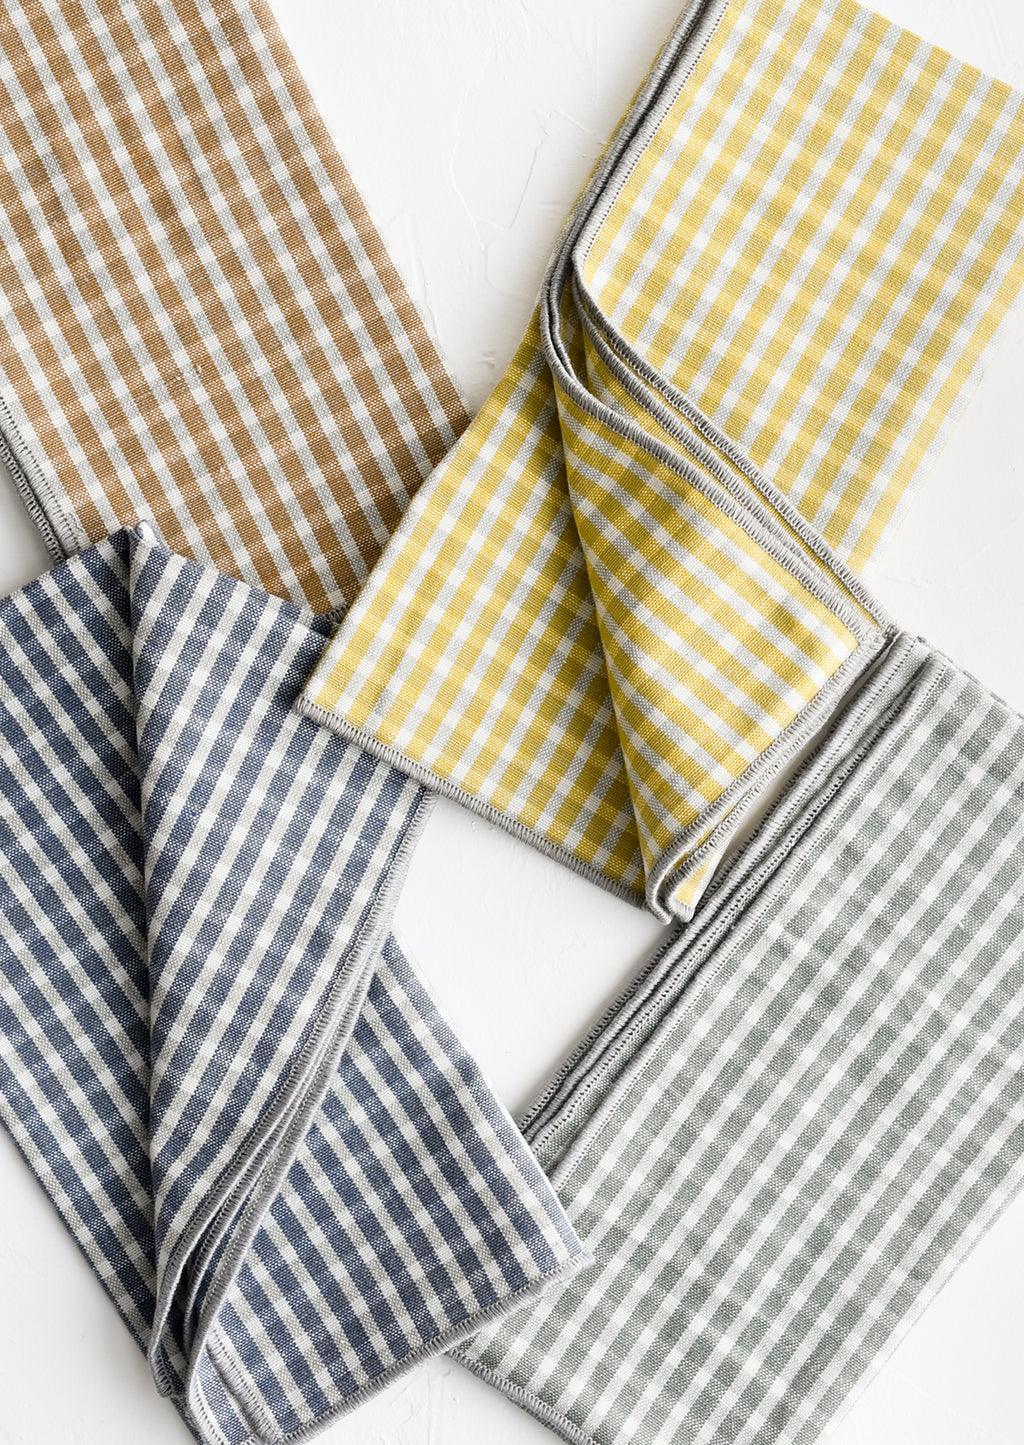 1: A set of four plaid print napkins in a mix of colors.